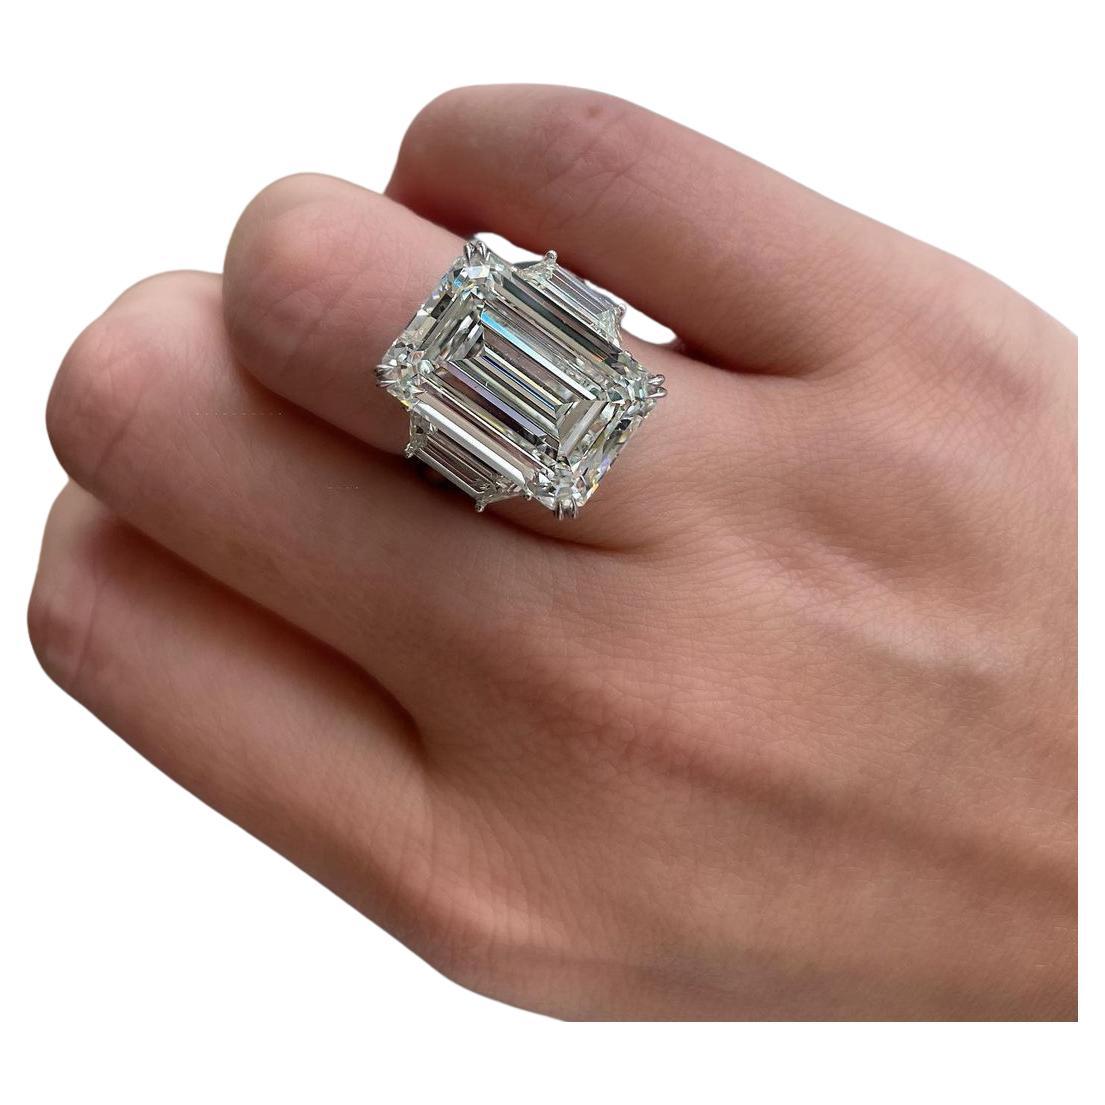 EXCEPTIONAL GIA Certified 10 Carat Emerald Cut Diamond Ring For Sale